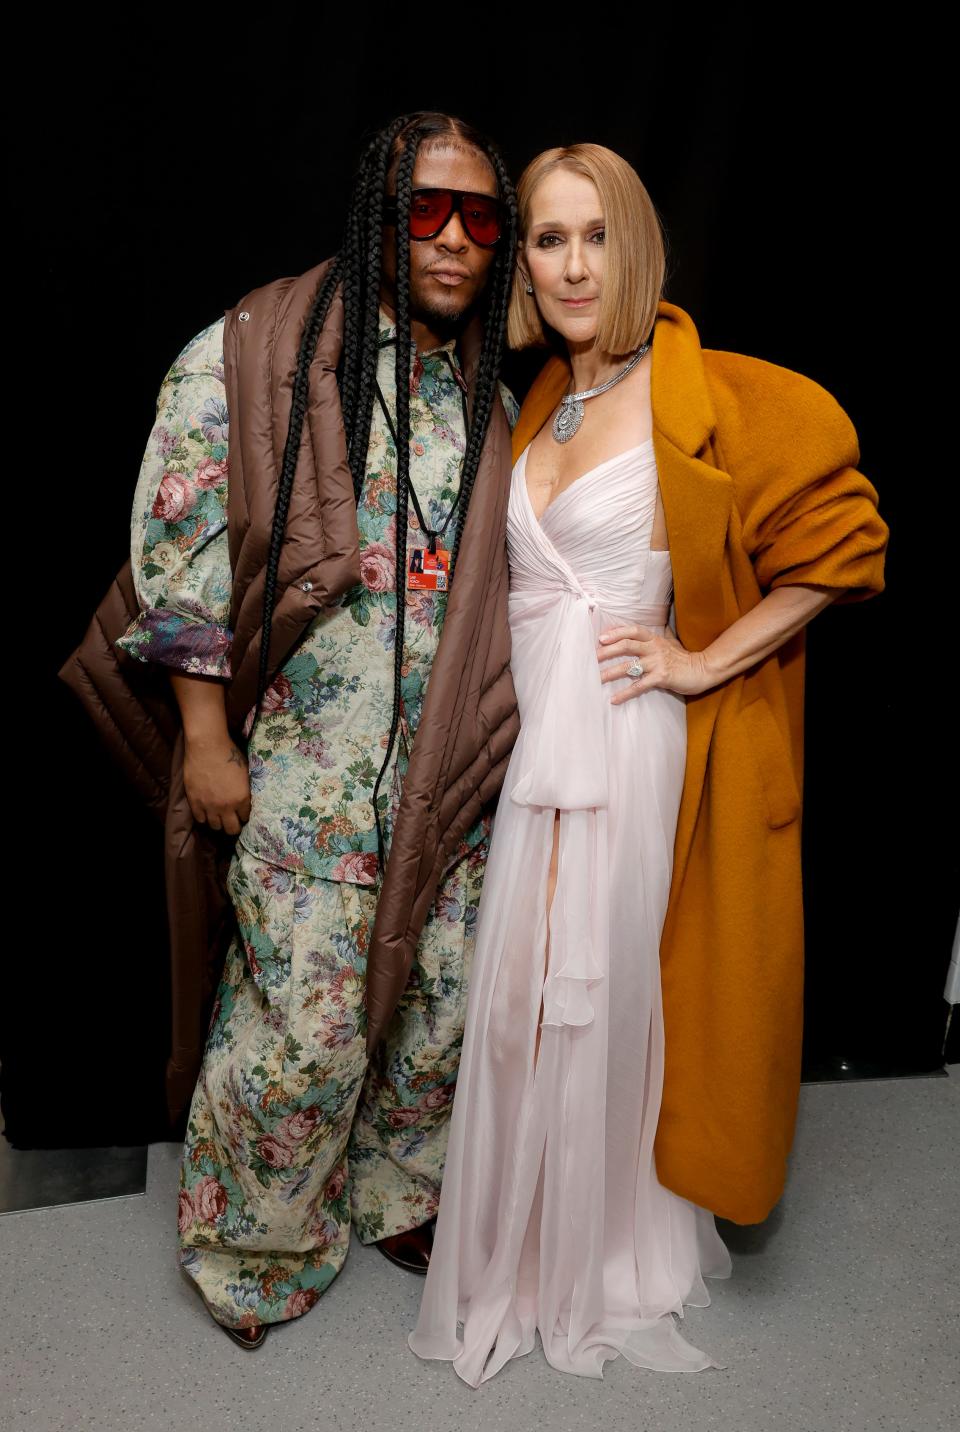 Roach styled Dion for her surprise appearance at the Grammys on Feb. 4.